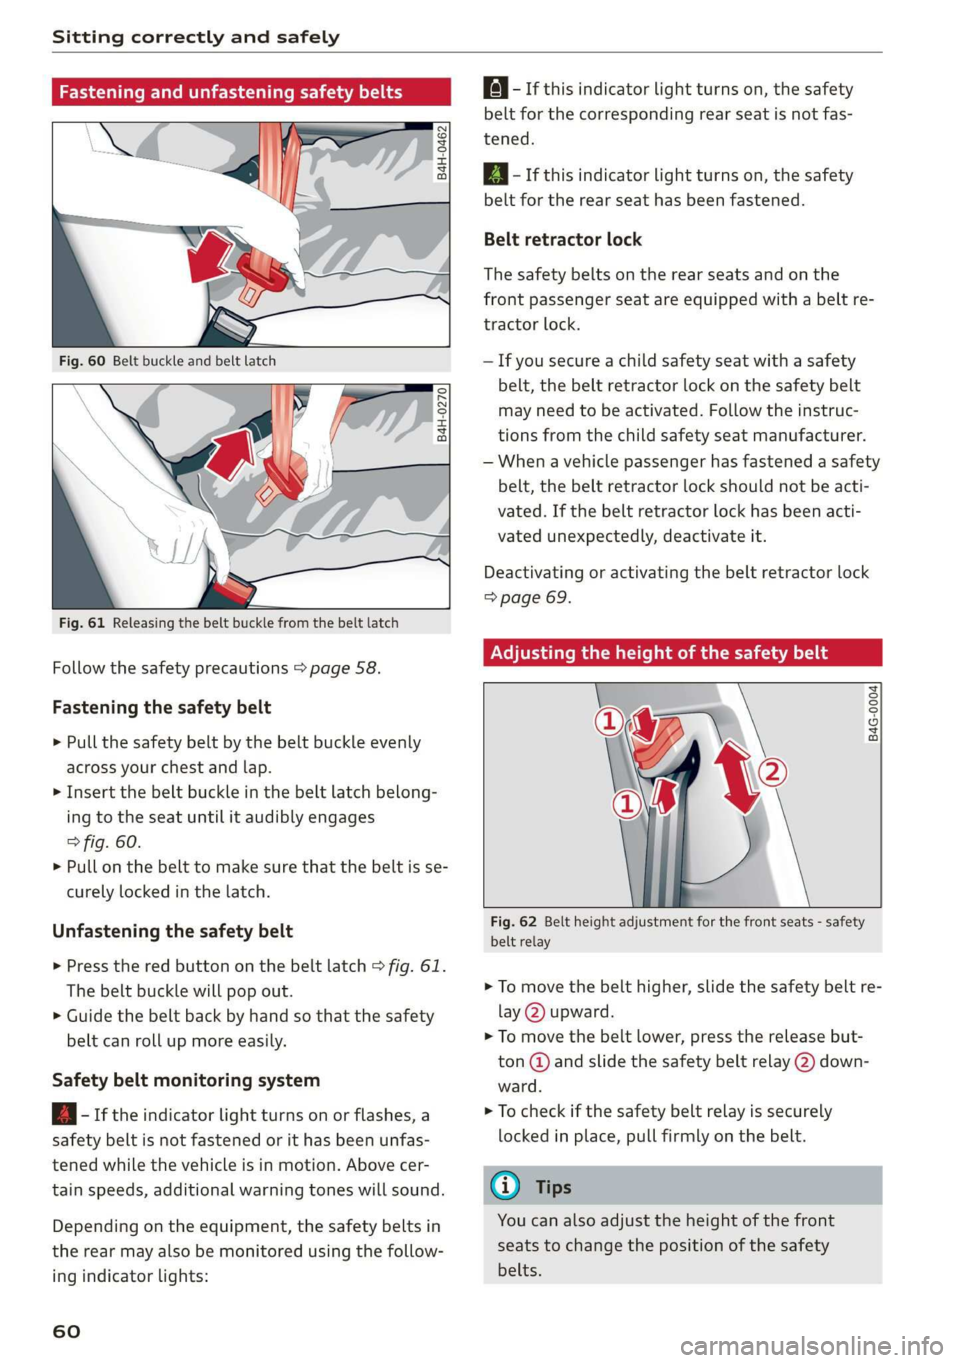 AUDI Q3 2019  Owners Manual Sitting correctly and safely 
  
rice mTOR eee iti all 
  
B4H-0462 
  
  
B4H-0270 
  
  
  
Fig. 61 Releasing the belt buckle from the belt latch 
Follow the safety precautions > page 58. 
Fastening